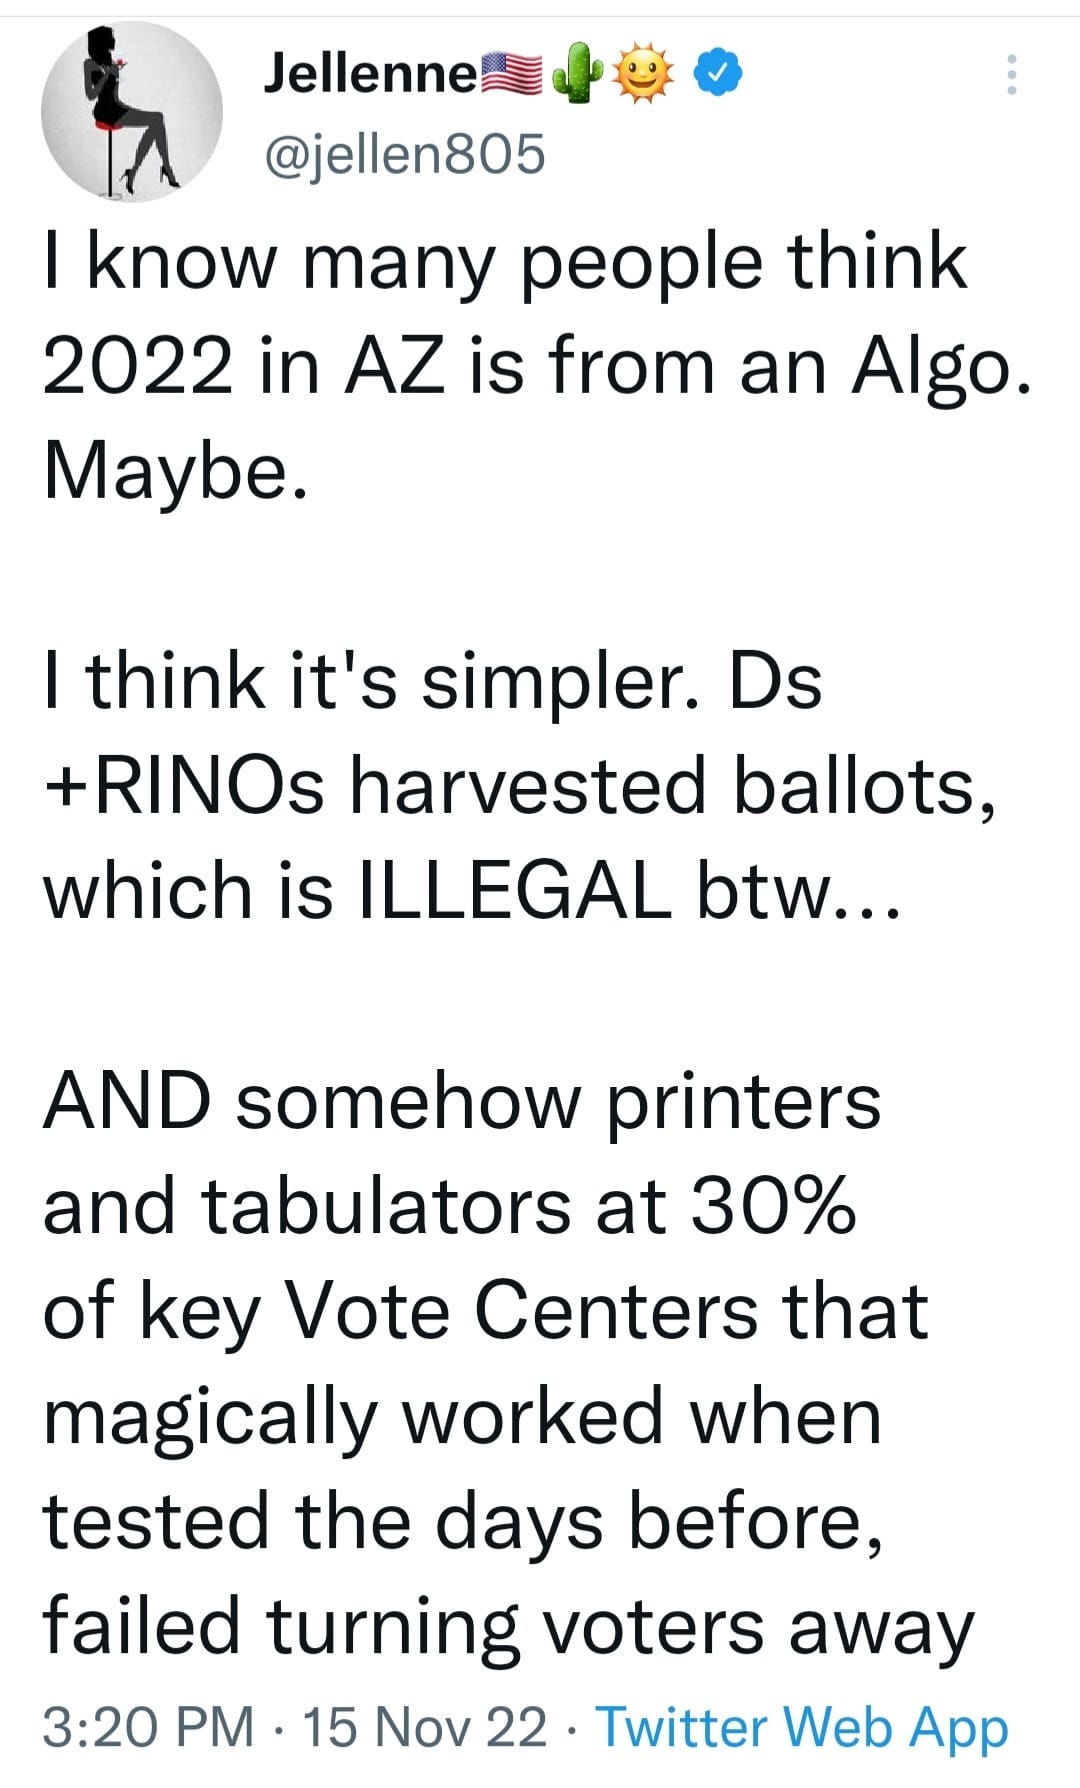 May be an image of text that says 'Jellenne @jellen805 I know many people think 2022 in AZ is from an Algo. Maybe. I think it's simpler. Ds +RINOs harvested ballots, which is ILLEGAL btw... AND somehow printers and tabulators at 30% of key Vote Centers that magically worked when tested the days before, failed turning voters away 3:20 PM 15 Nov 22. Twitter Web App'